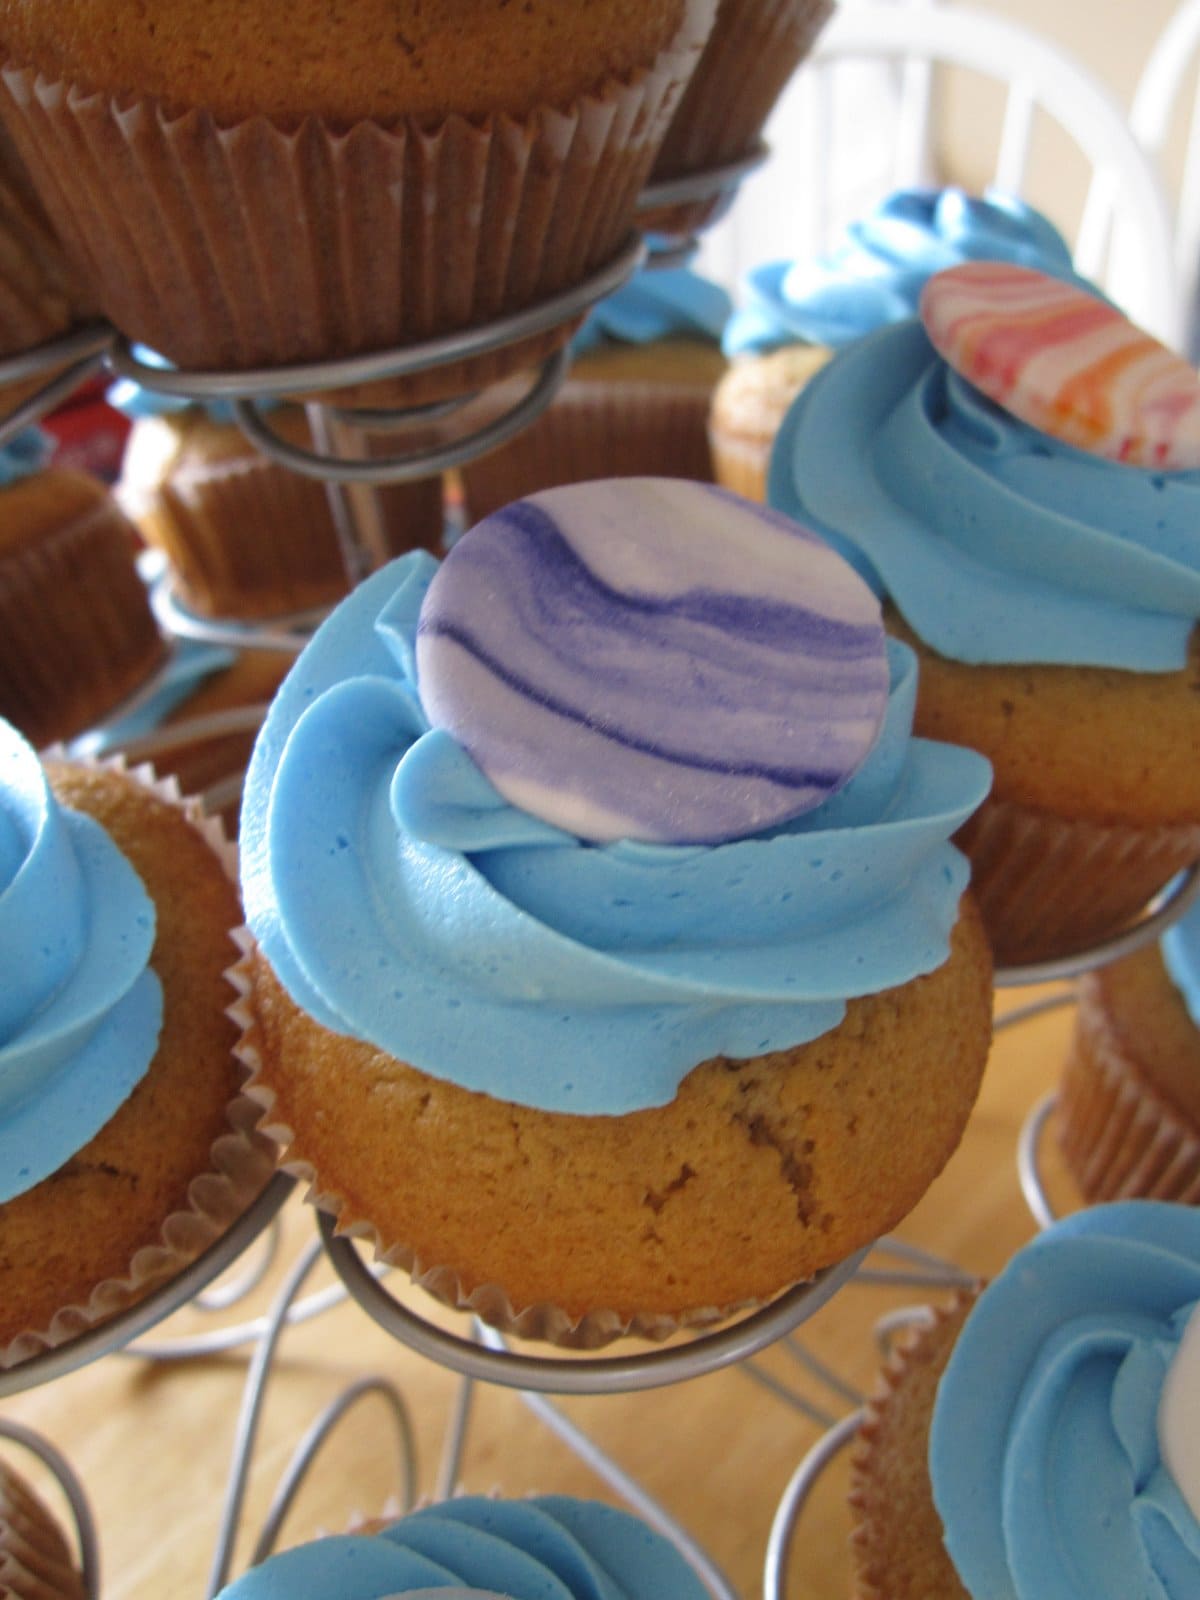 Close-up of a blue frosted cupcake with a purple disc on top